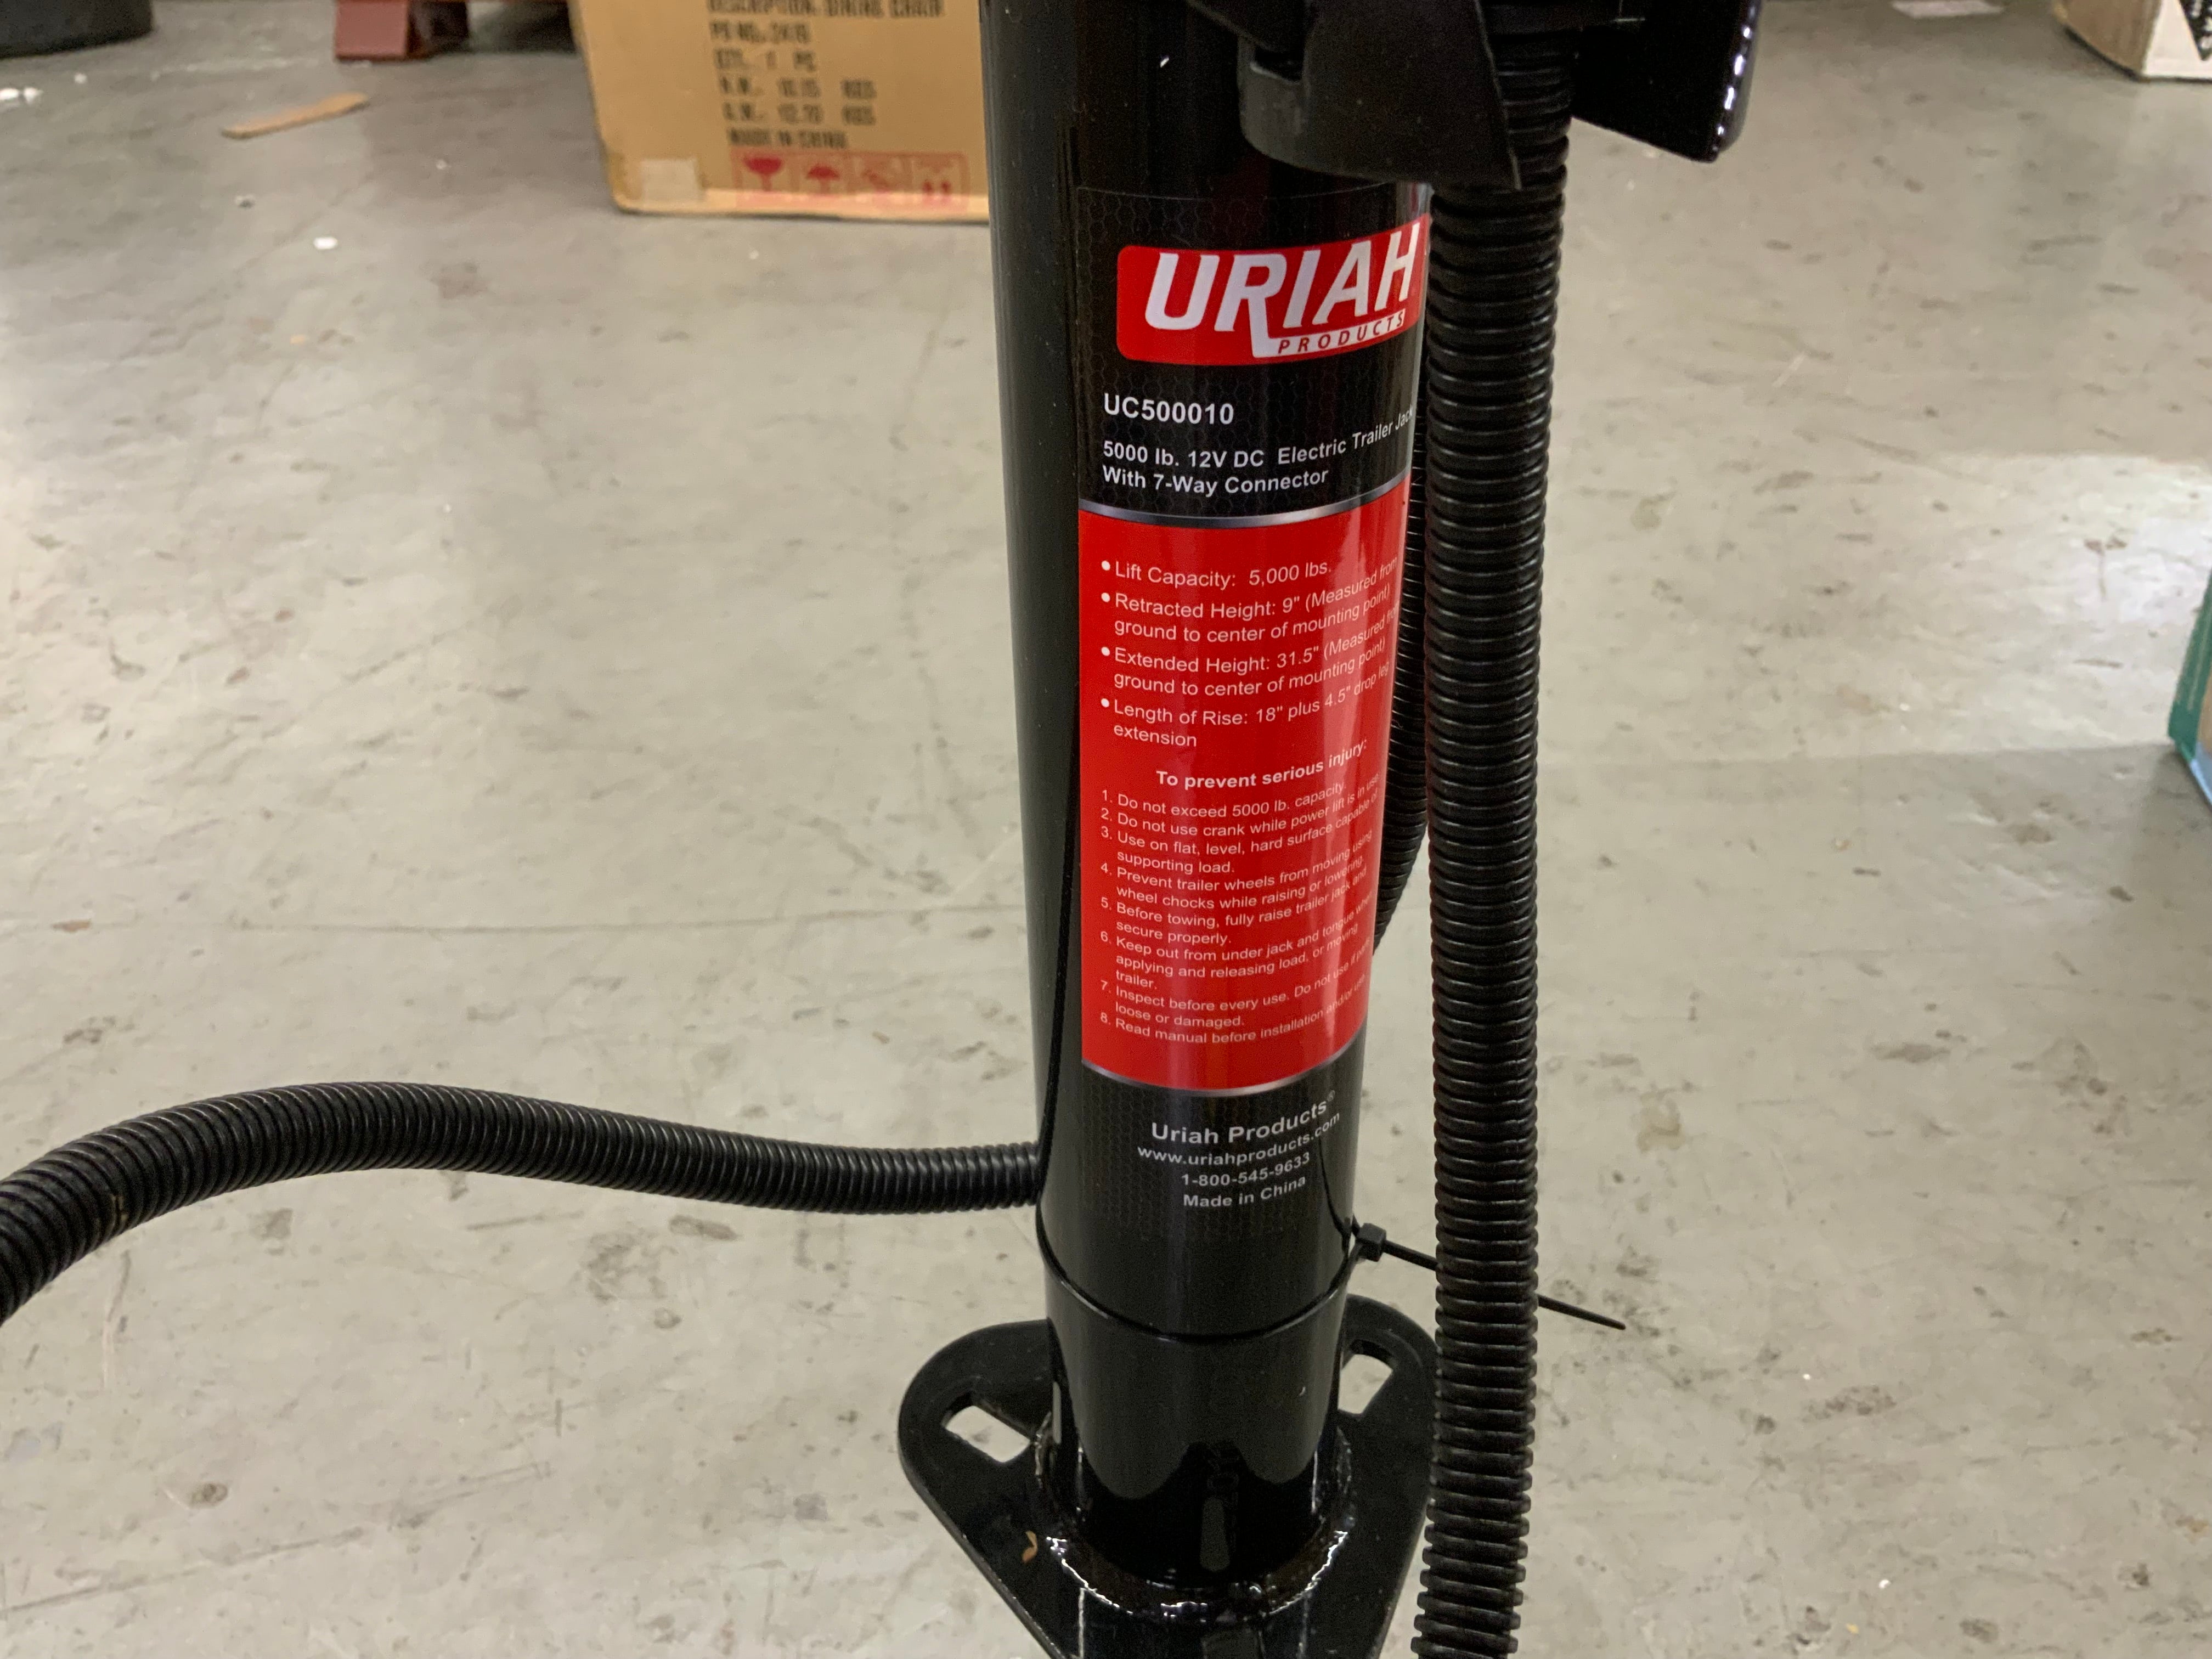 Uriah Products UC500010 Electric Trailer Jack (7-Way Connector, 5000 lb. 12V DC) (8180022345966)